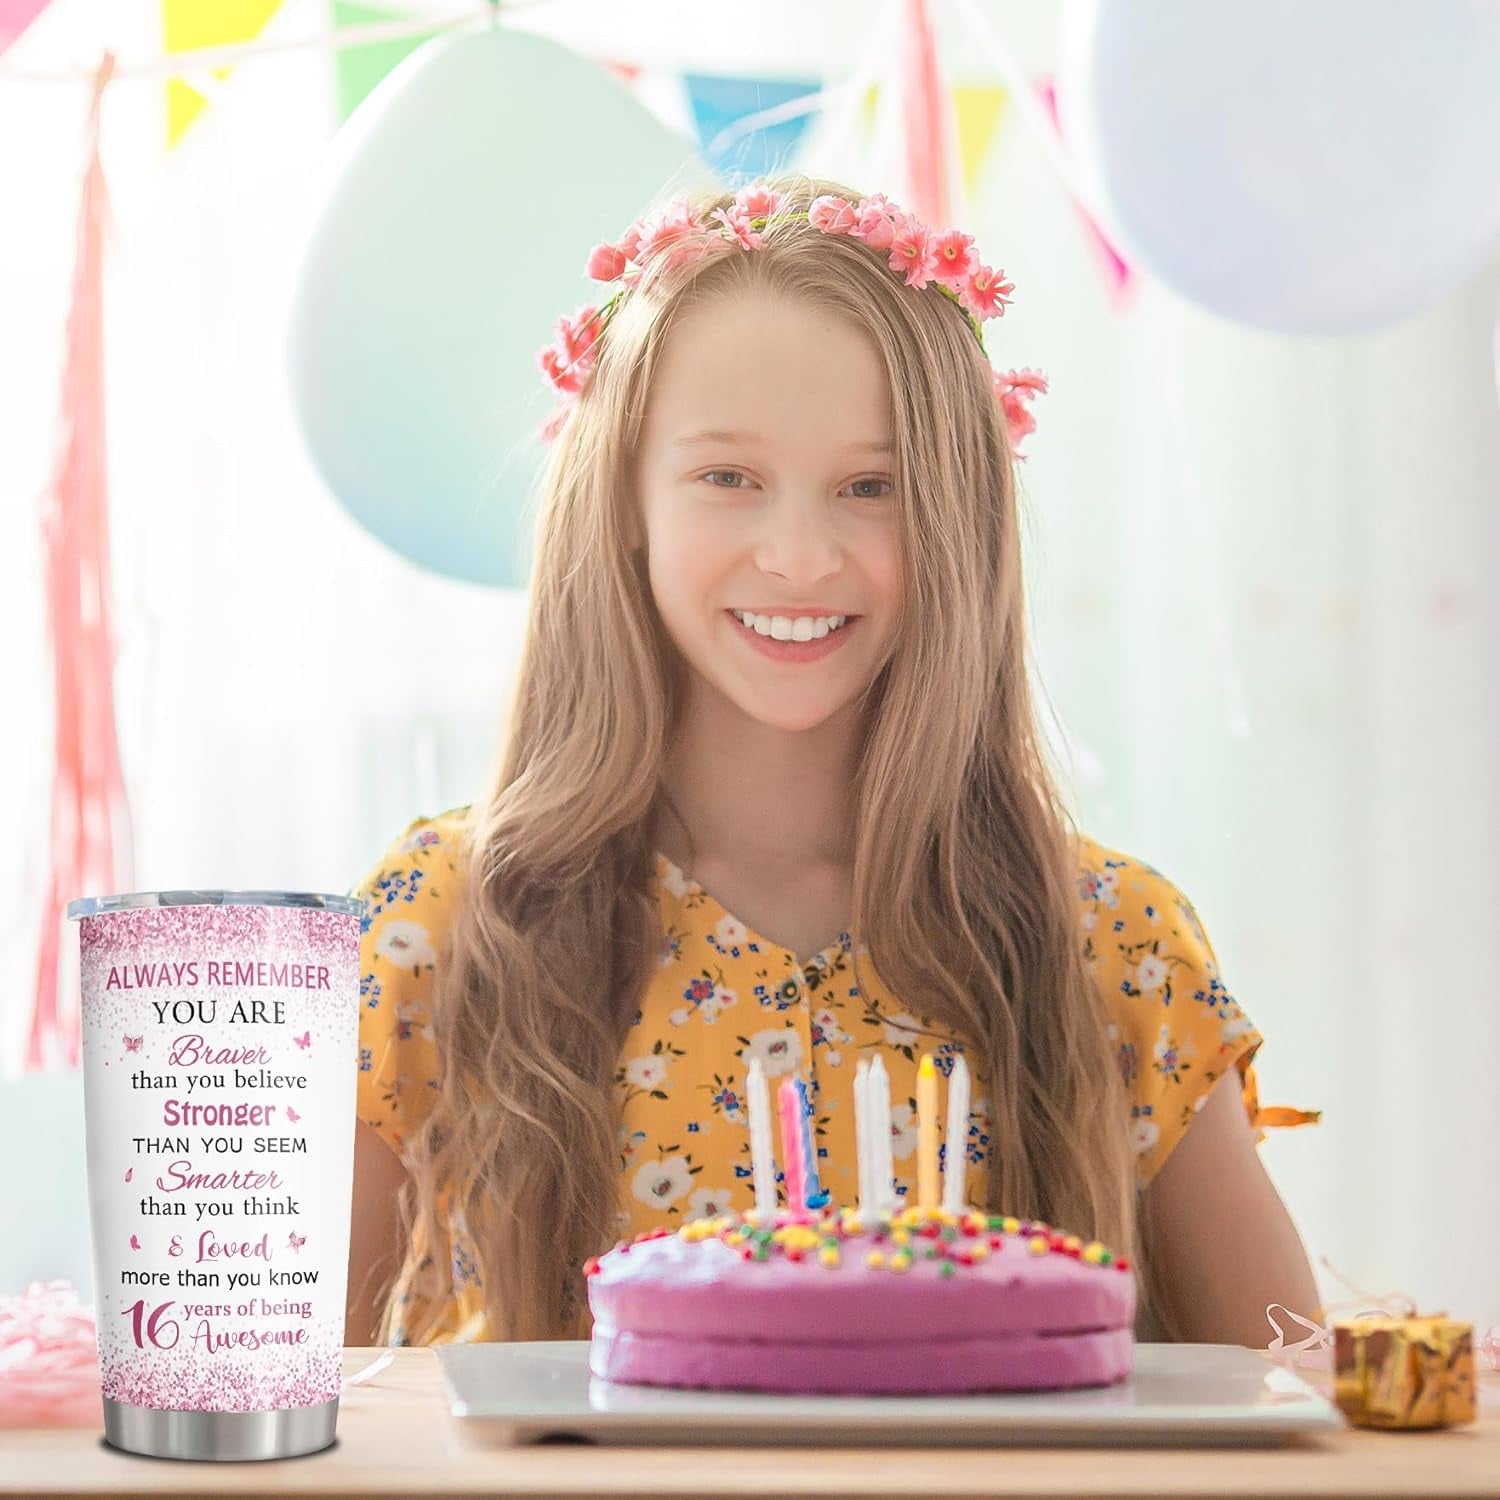 Amazon.com: 12 Year Old Girl Birthday Gifts, Best Gifts for 12 Year Old Girl,  12 Yr Old Girl Birthday Gift Ideas, Birthday Presents for Girls Age 12,  12th Birthday Decorations for Girls